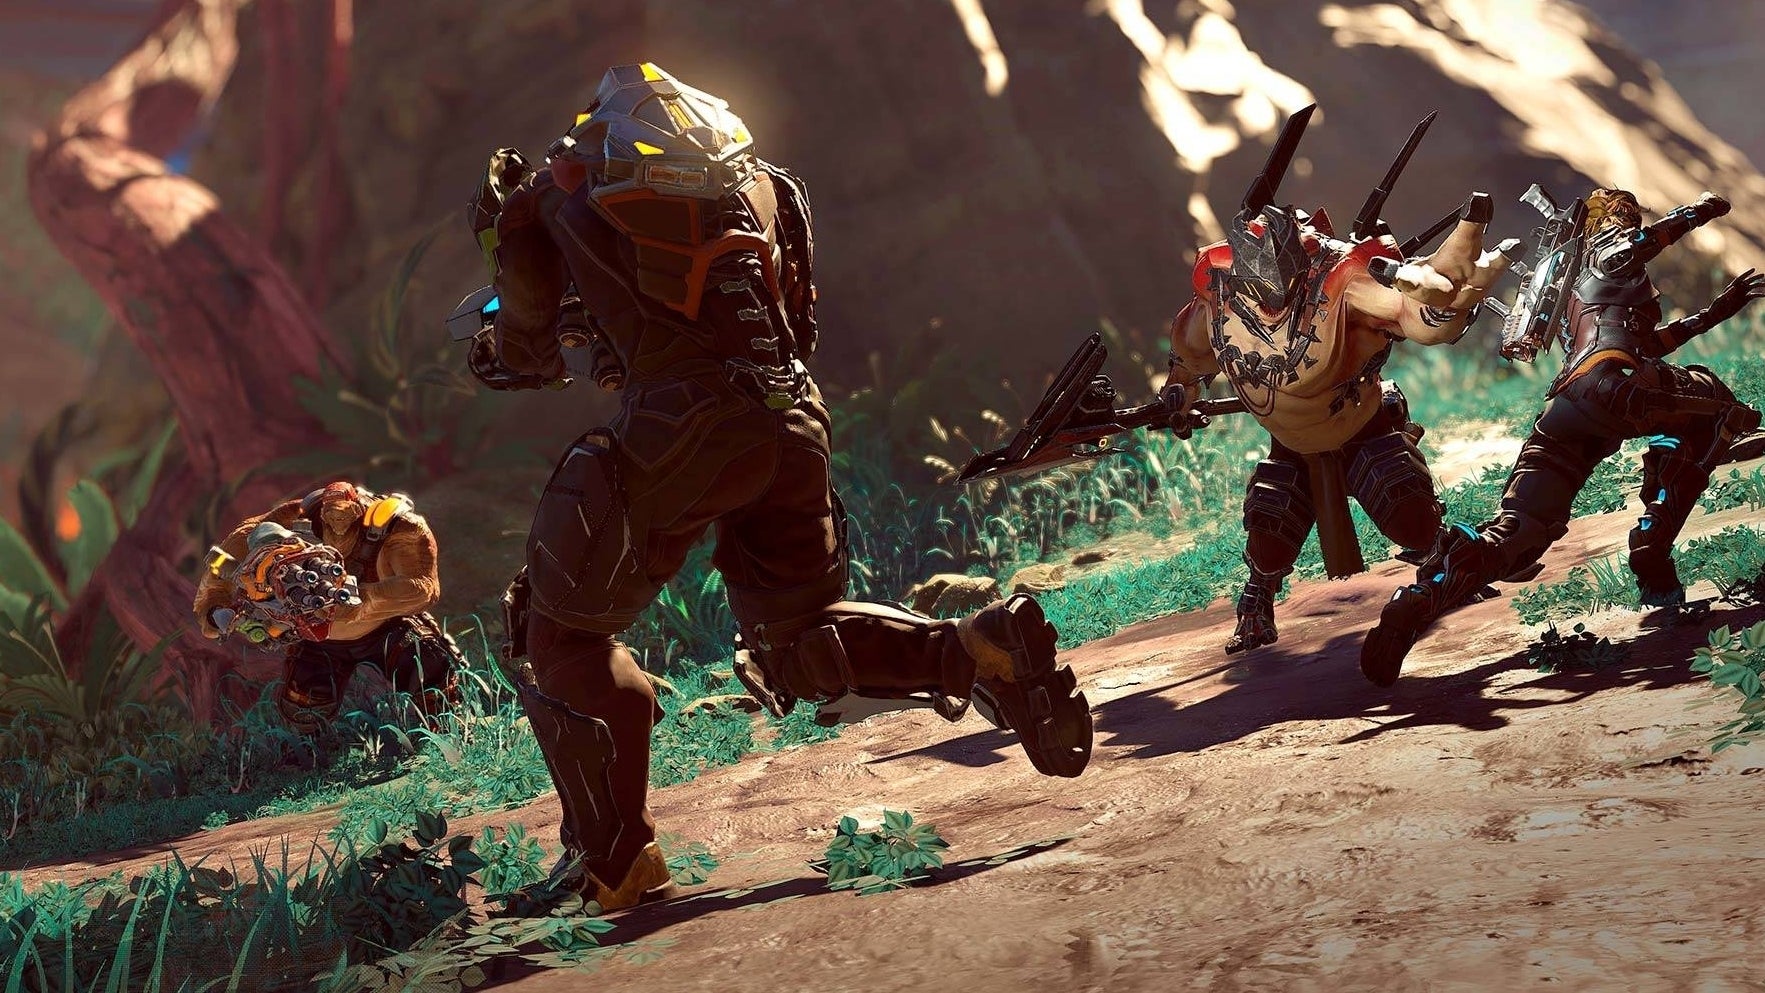 Image for Amazon's team-based shooter Crucible "retiring" two of its three modes